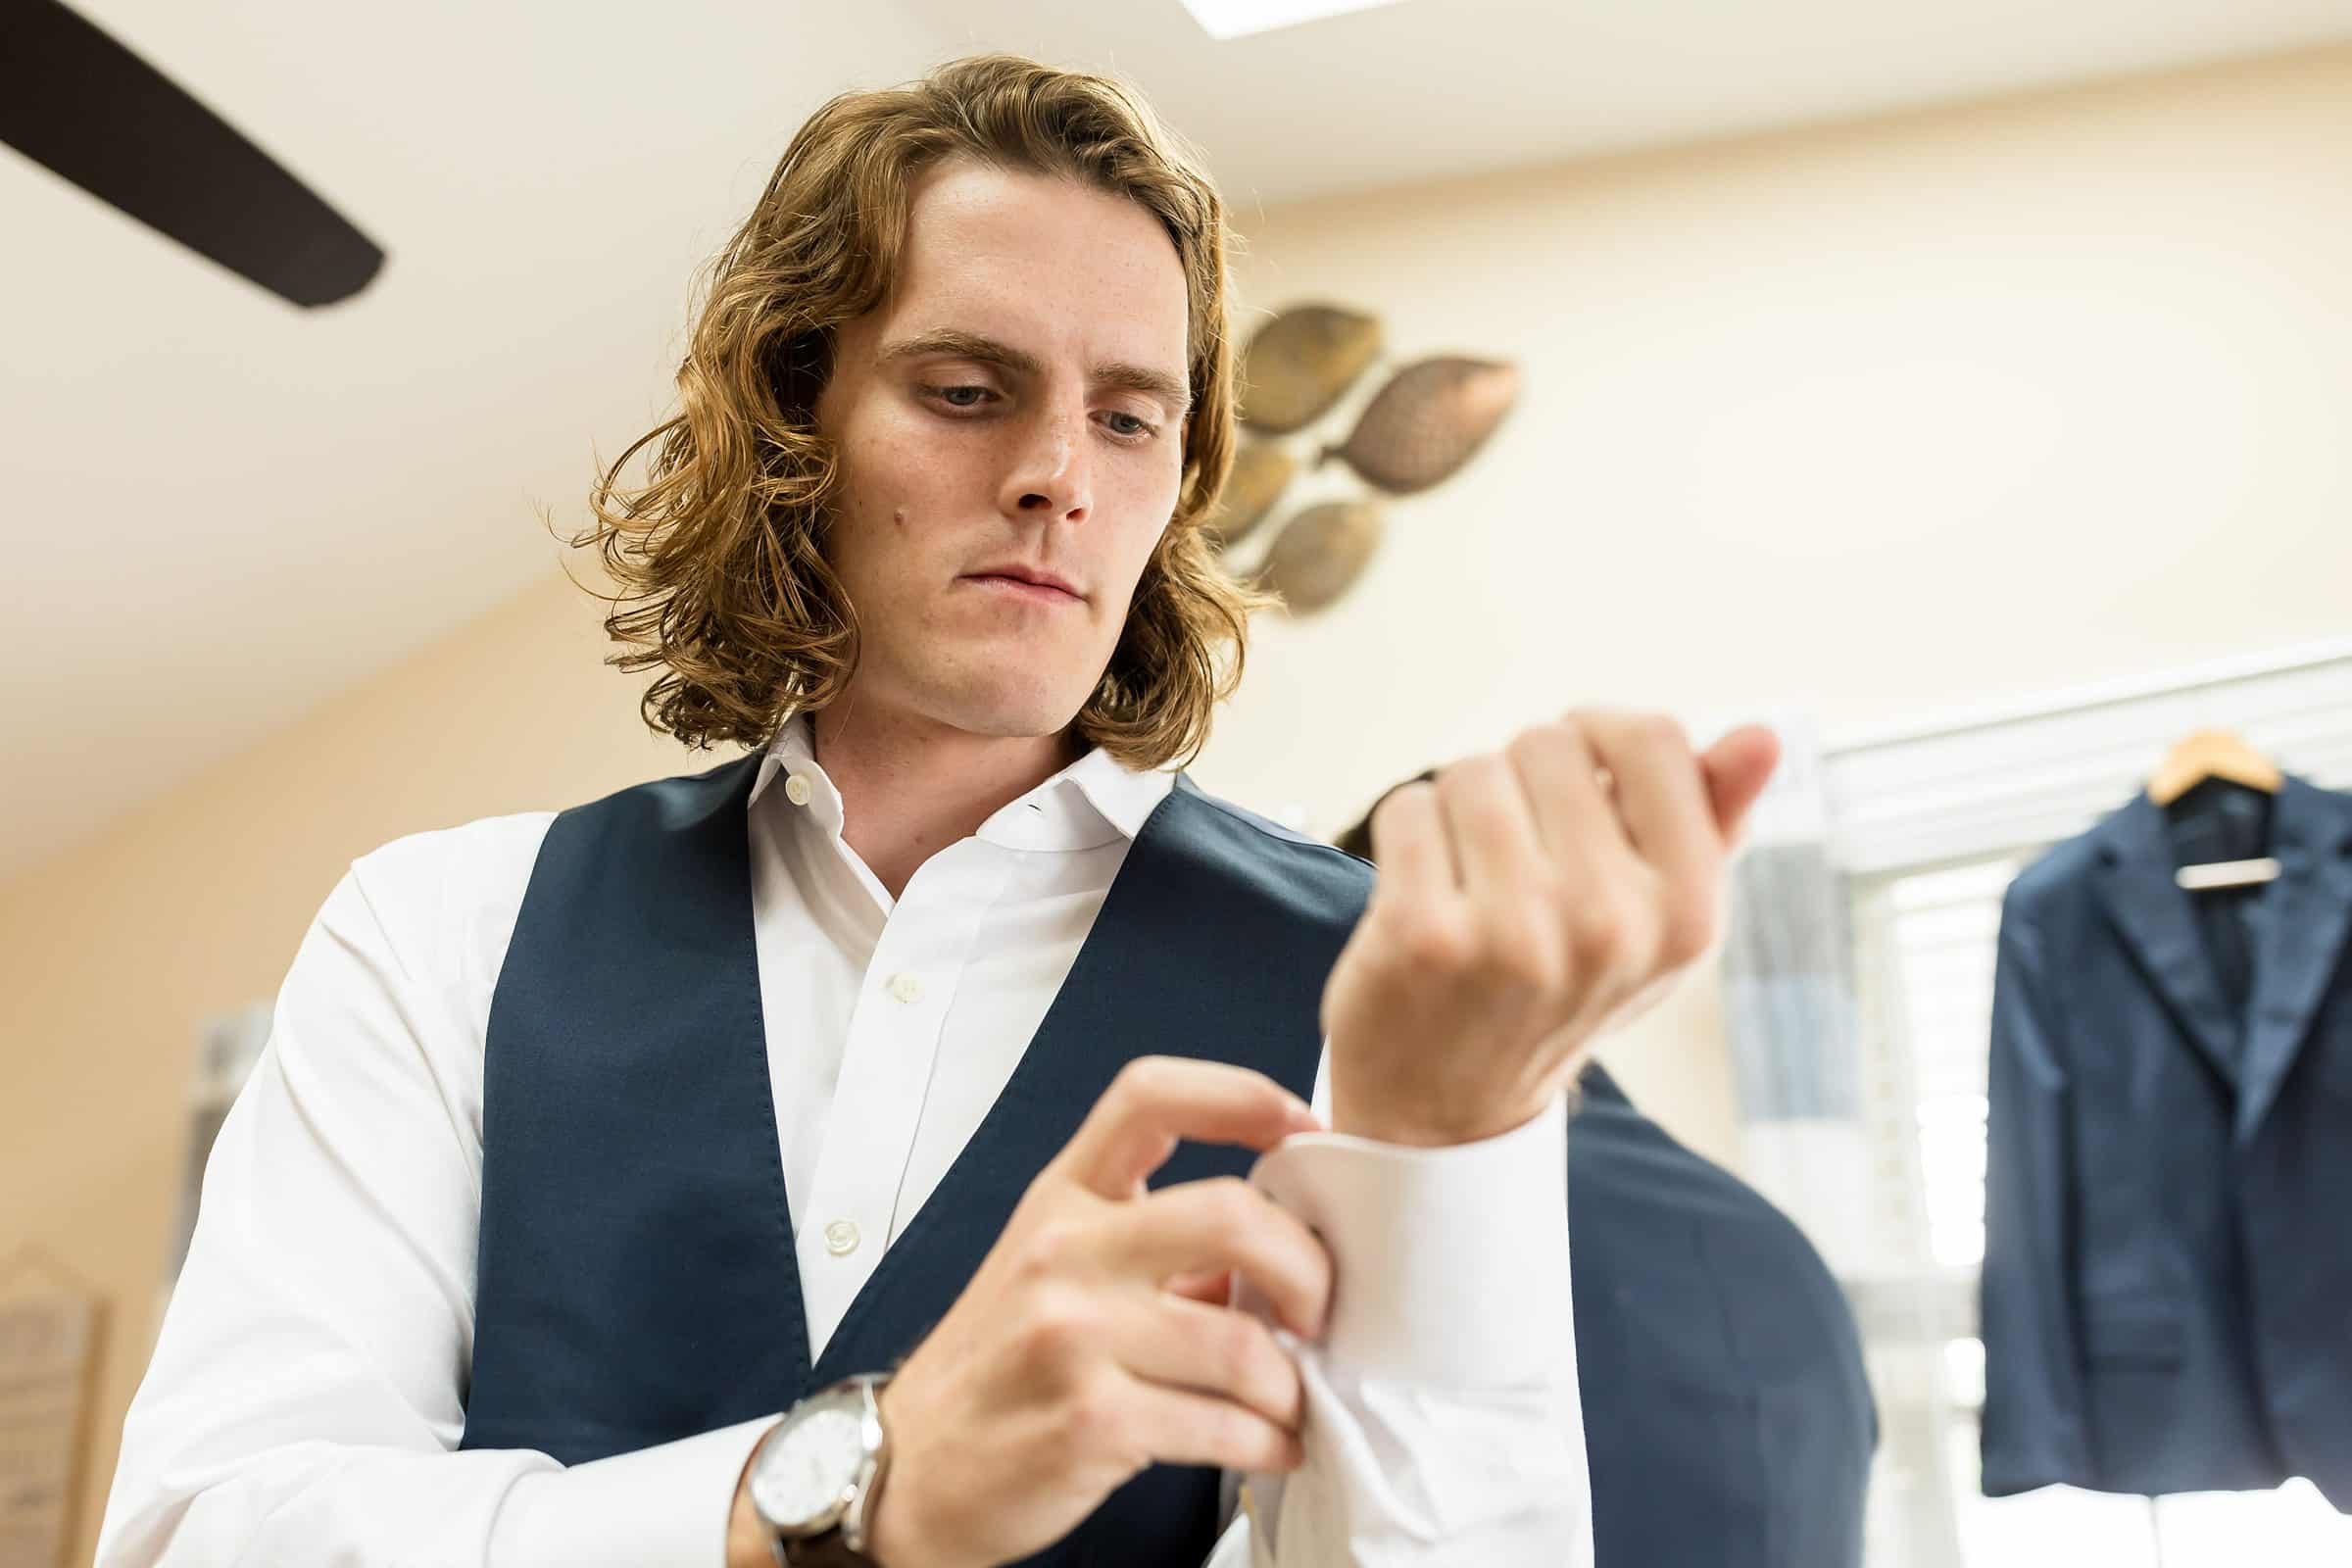 A man with long hair adjusts the cuff of his white dress shirt while wearing a navy vest. A suit jacket is hung in the background.